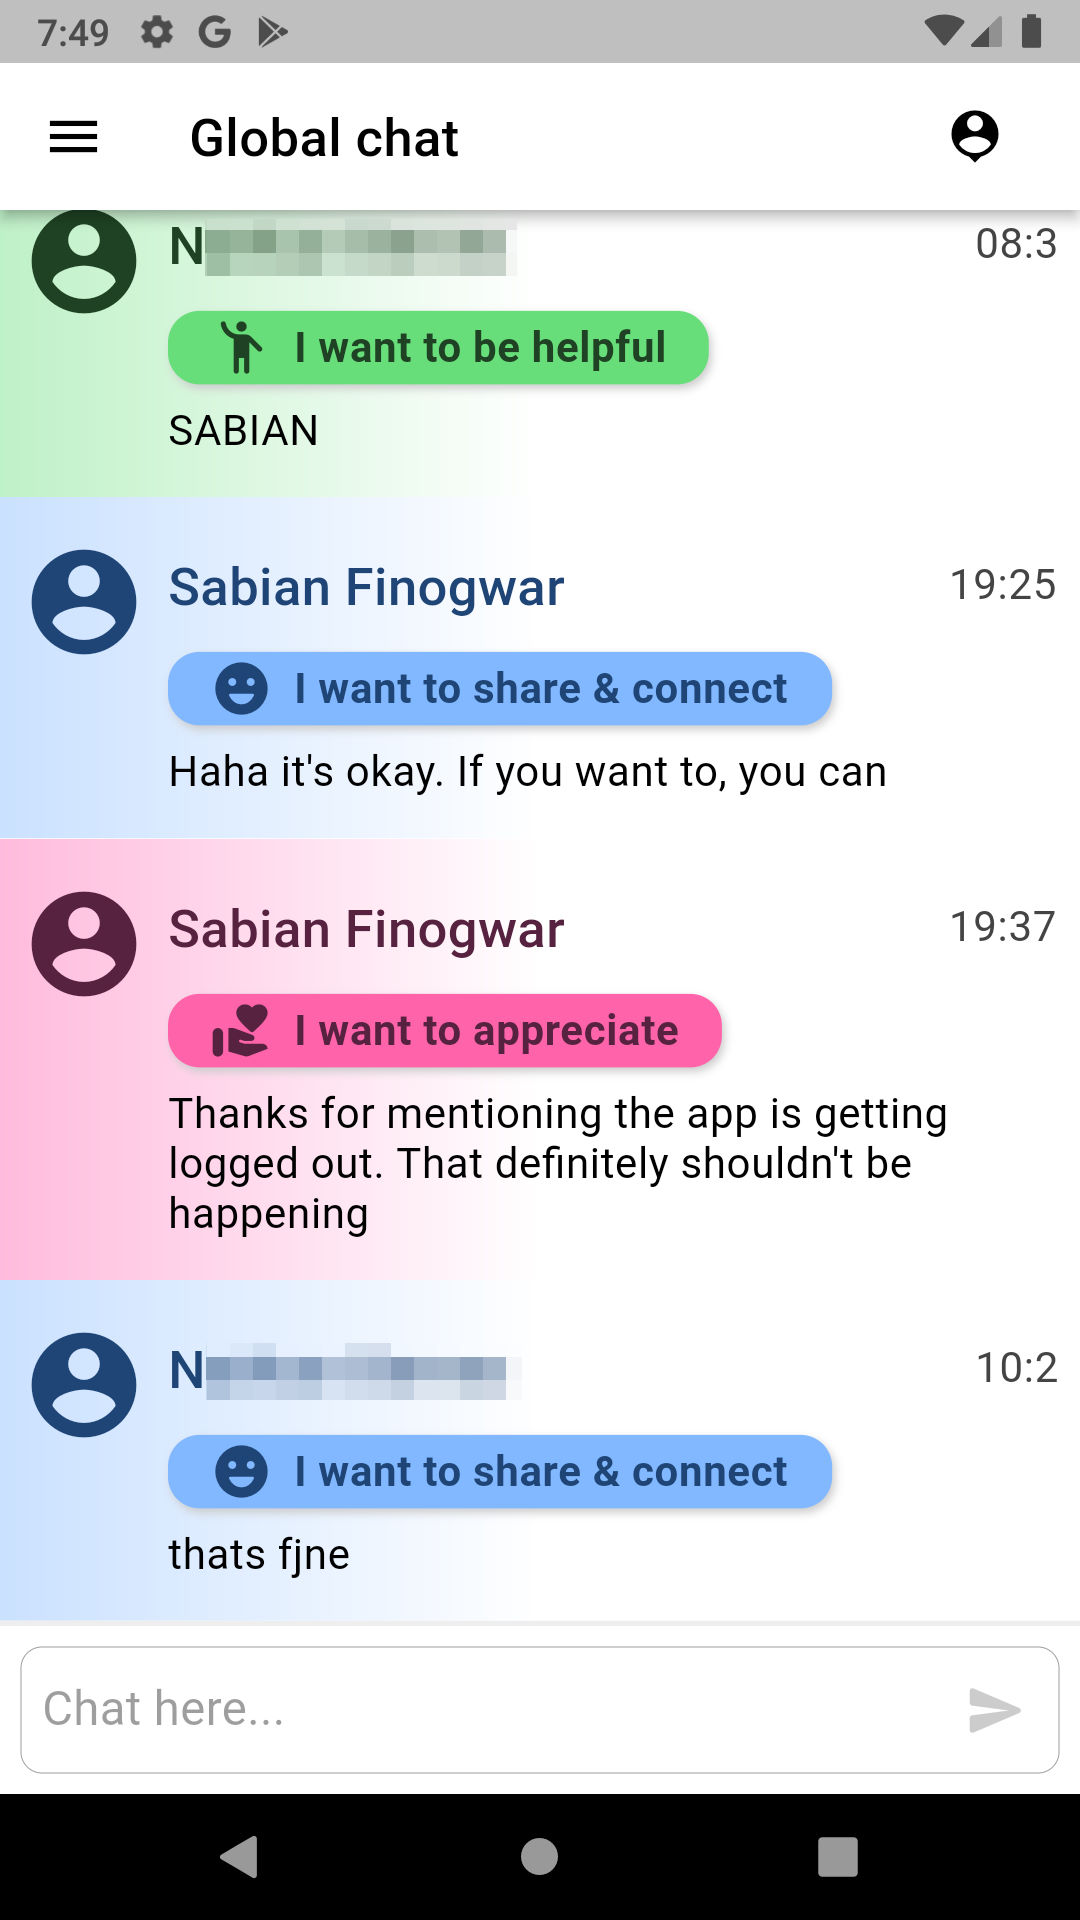 Image of Ugeddit global chat with messages 2022-04-30. N wrote, with the intention to be helpful, Sabian! Sabian Finogwar wrote, with the intention to share and connect, Haha it's okay. If you want to, you can. Sabian Finogwar wrote, with the intention to appreciate, Thanks for mentioning the app is getting logged out. That definitely shouldn't be happening. N wrote, with the intention to be share and connect, that's fine.